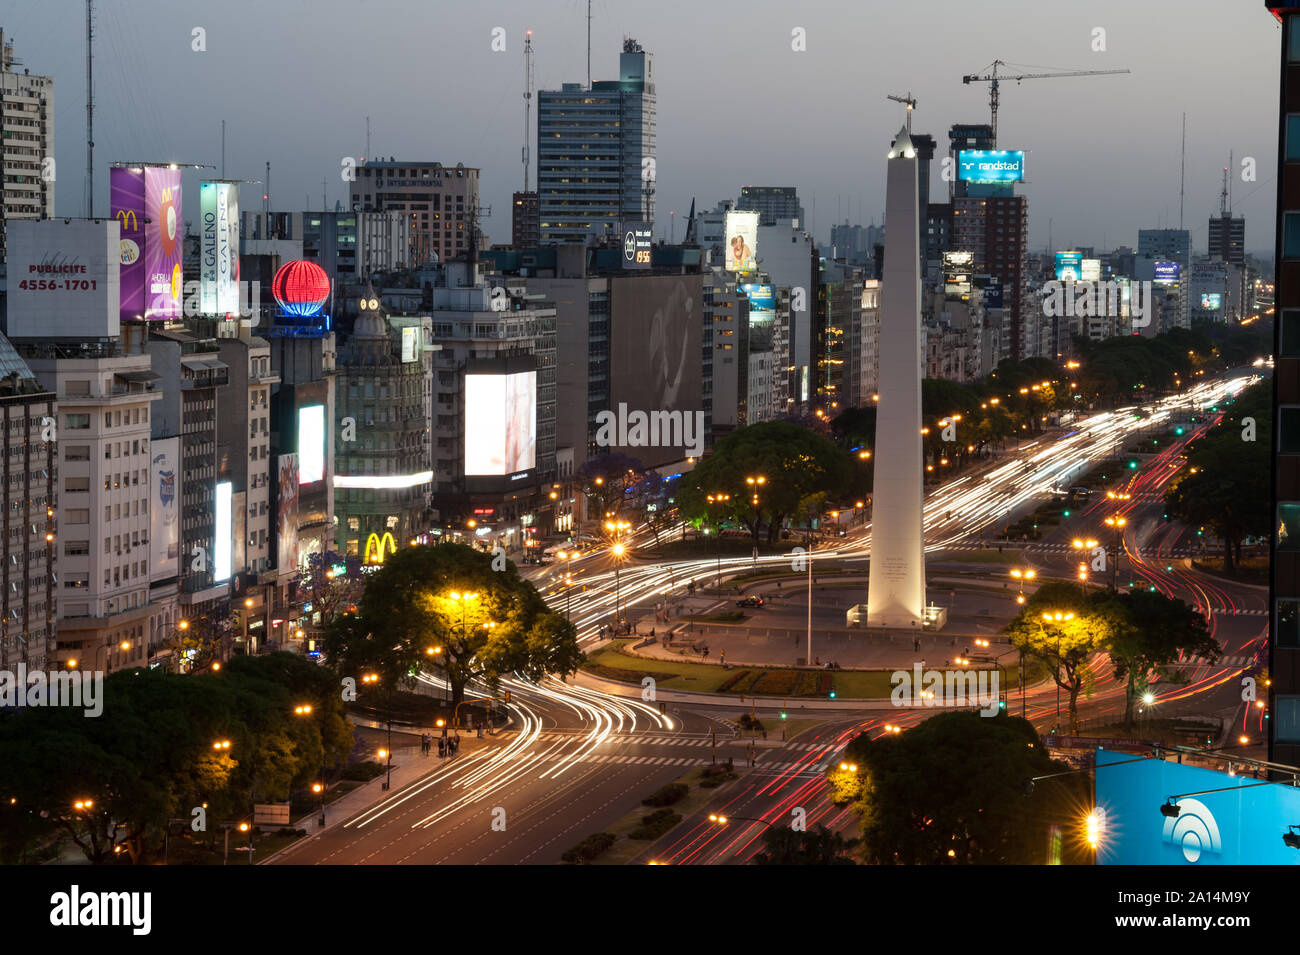 Buenos Aires, Argentina - November 14 2012: Rush hour and traffic on the sreets of Buenos Aires city by night. This photo shows the downtown and de 9 Stock Photo